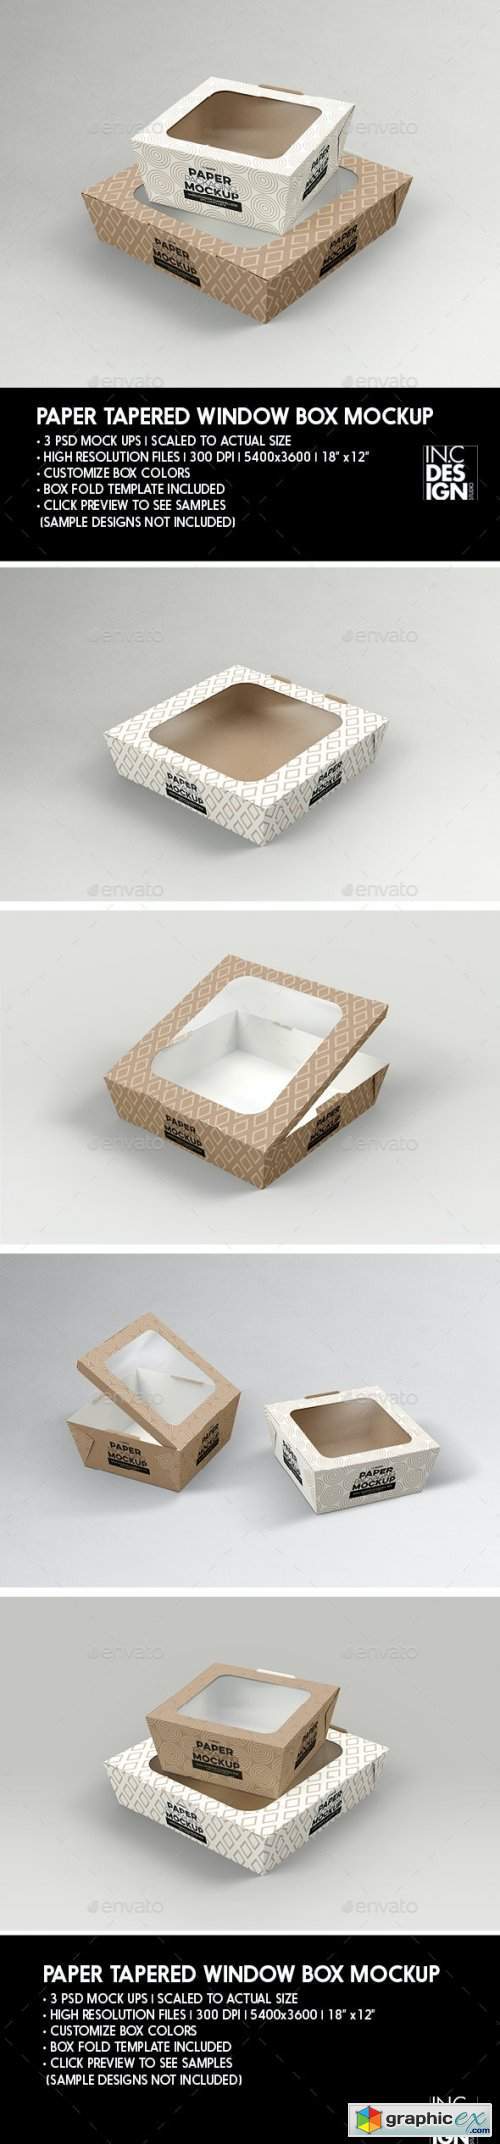 Paper Tapered Window Boxes Packaging Mockup